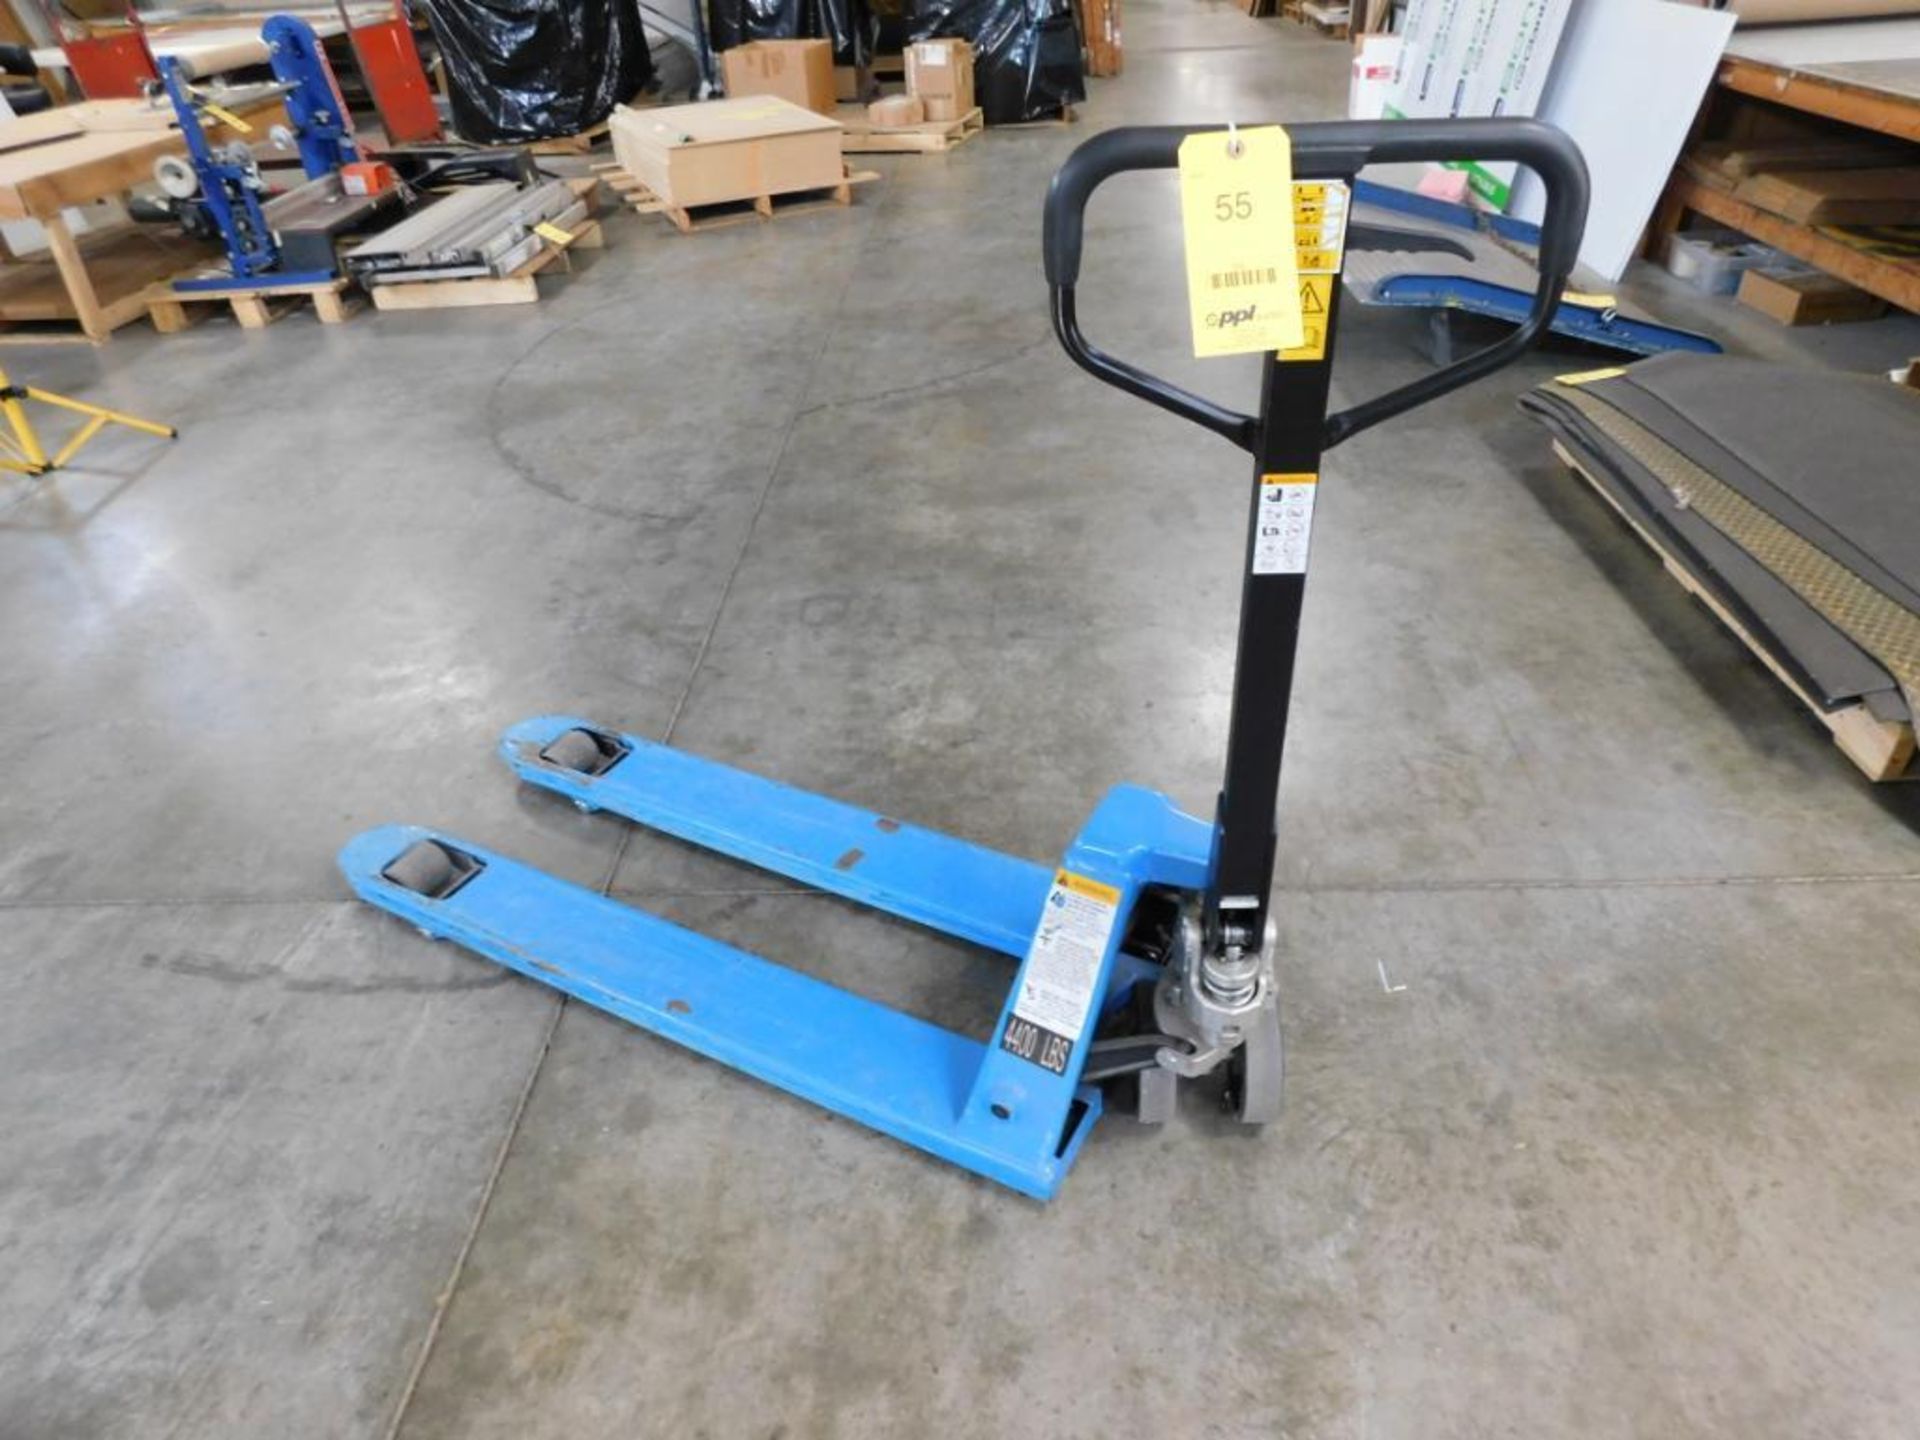 Uline 4400 lb. Quick-Lift Narrow Pallet Jack Model H-3762 (LOCATED IN ST. AUGUSTA, MN.)